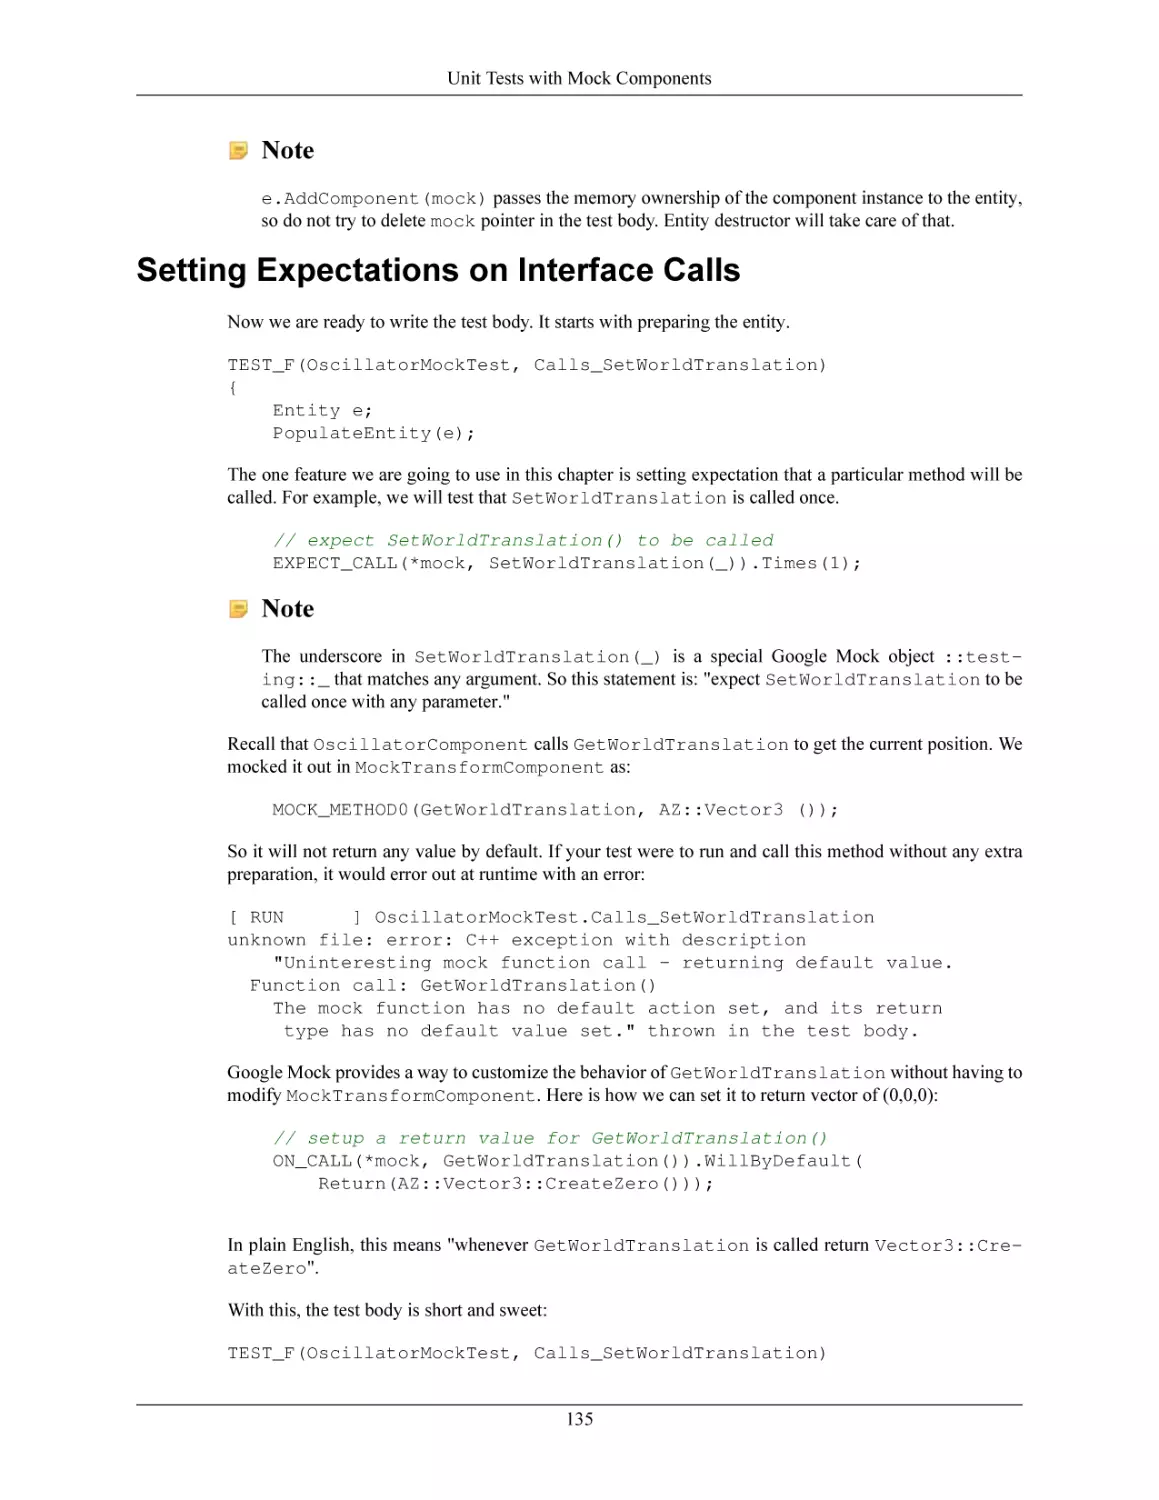 Setting Expectations on Interface Calls